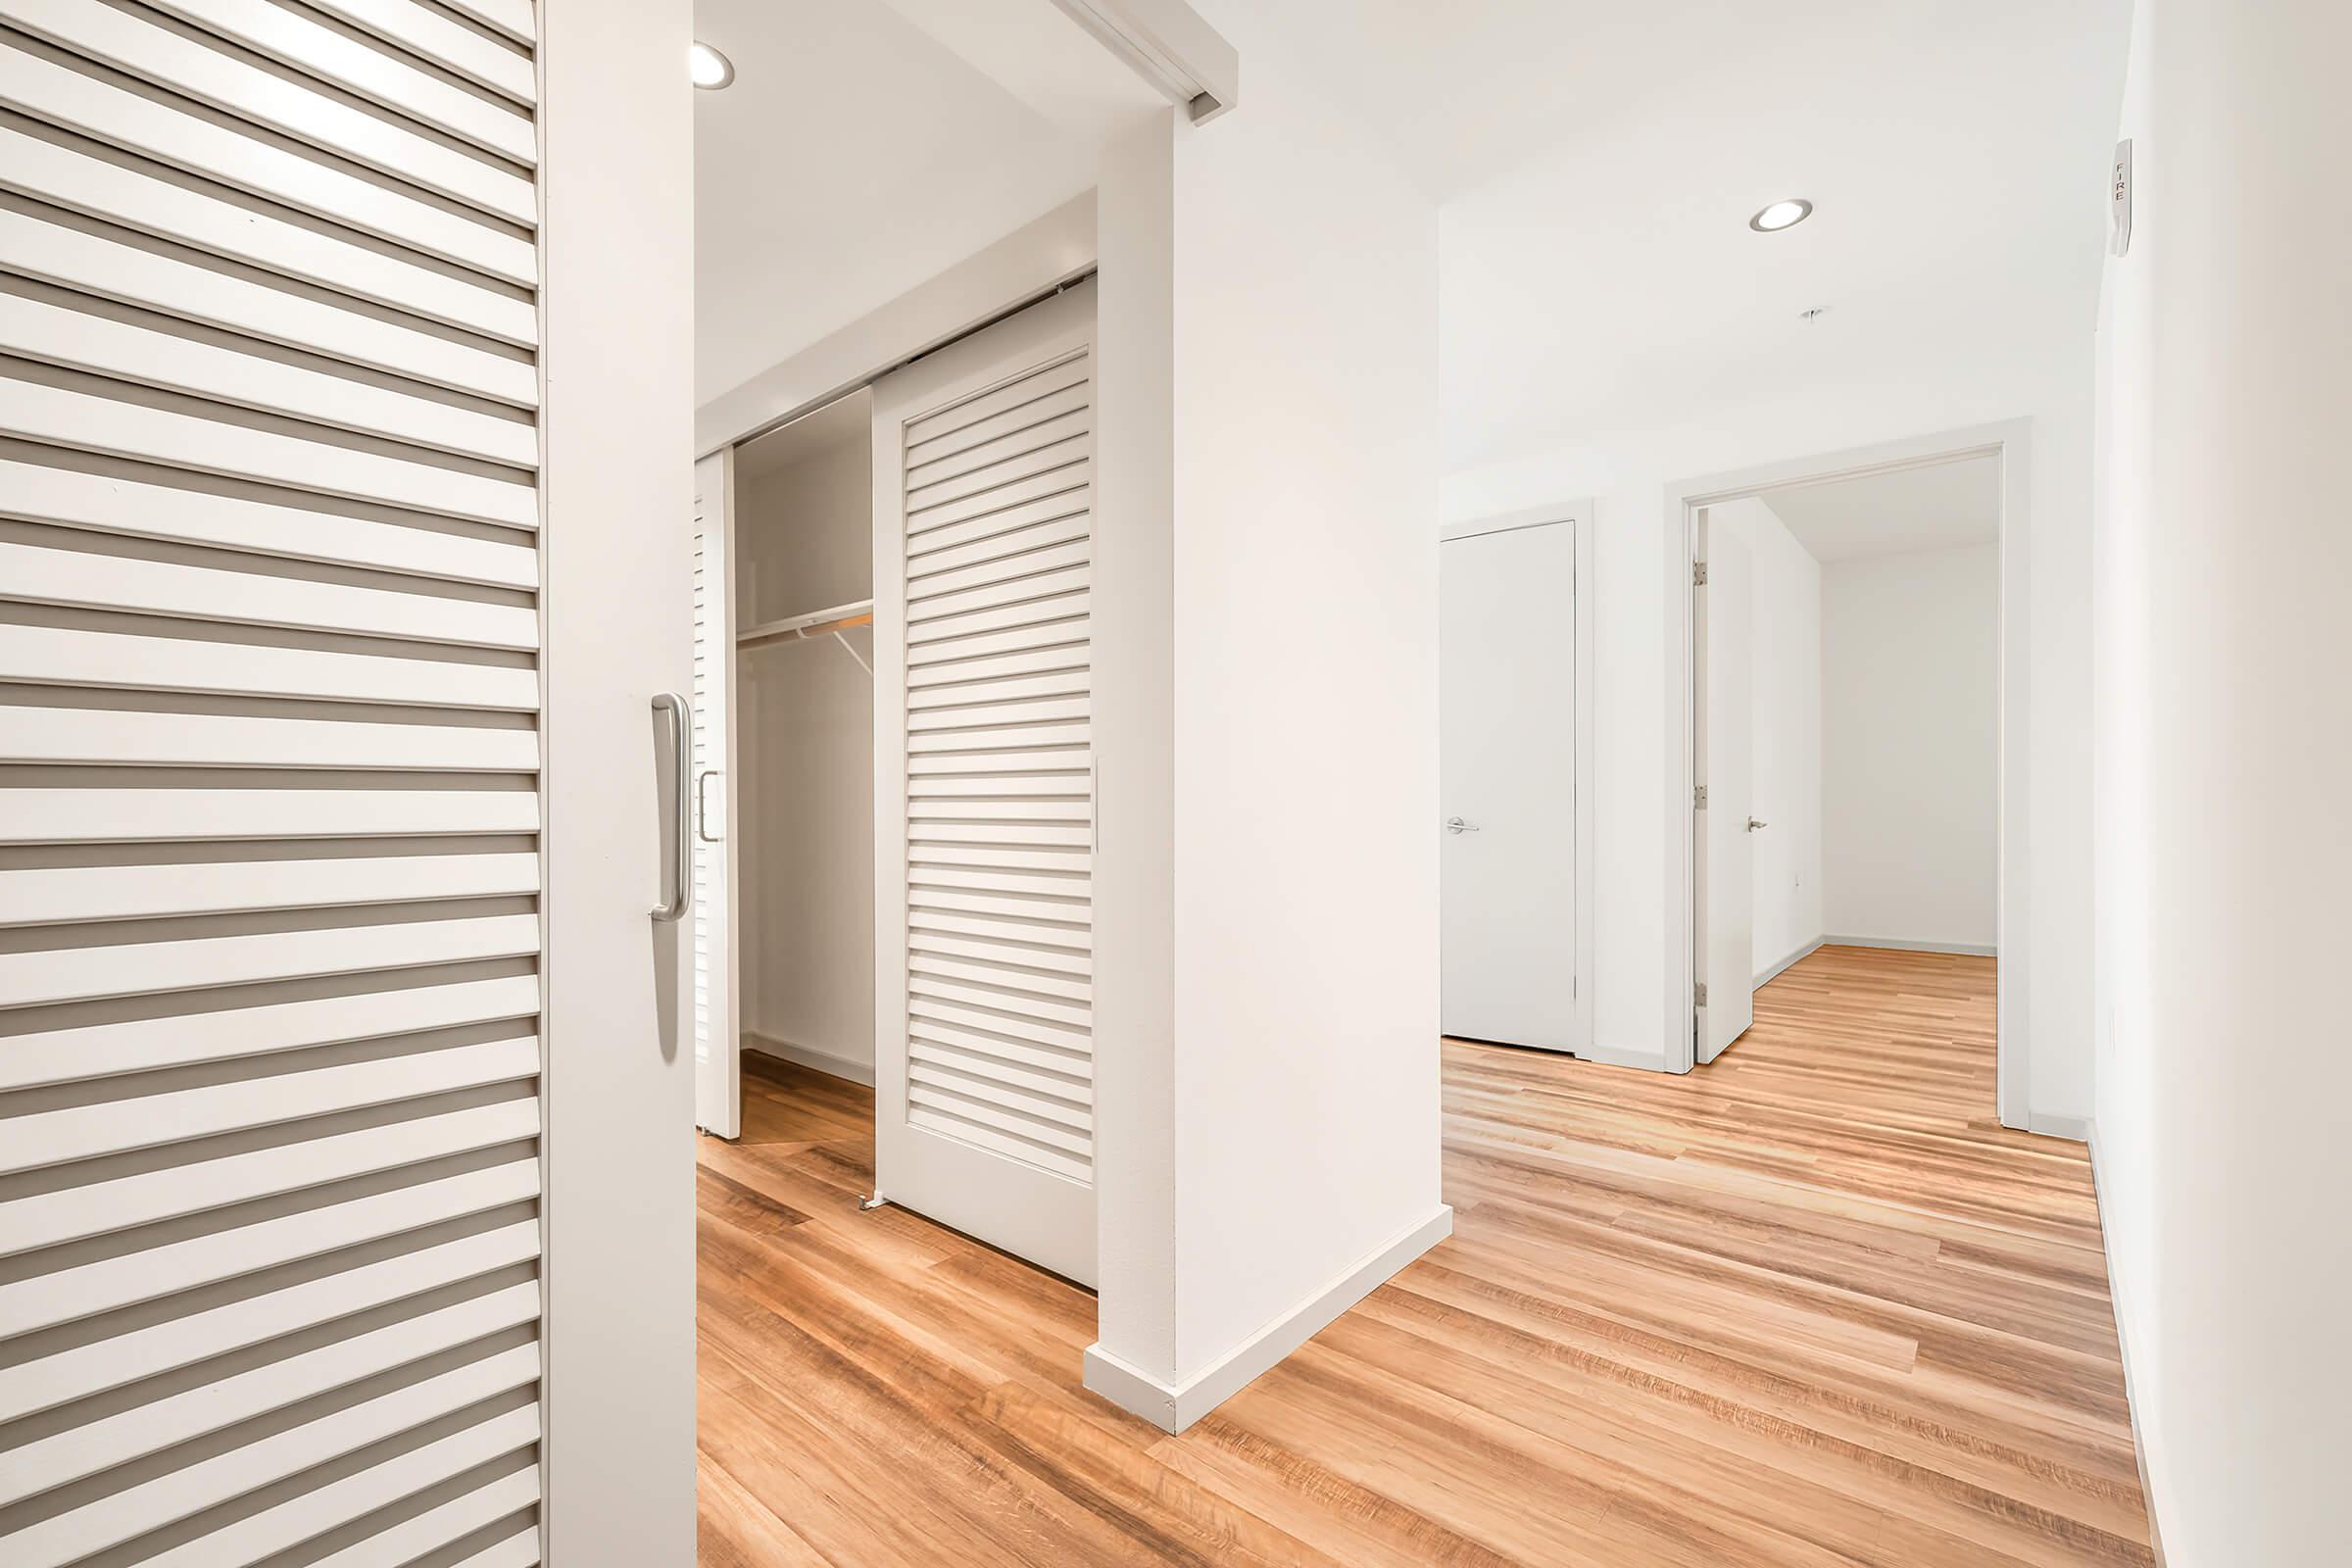 unfurnished hallways and bedroom with wooden floors